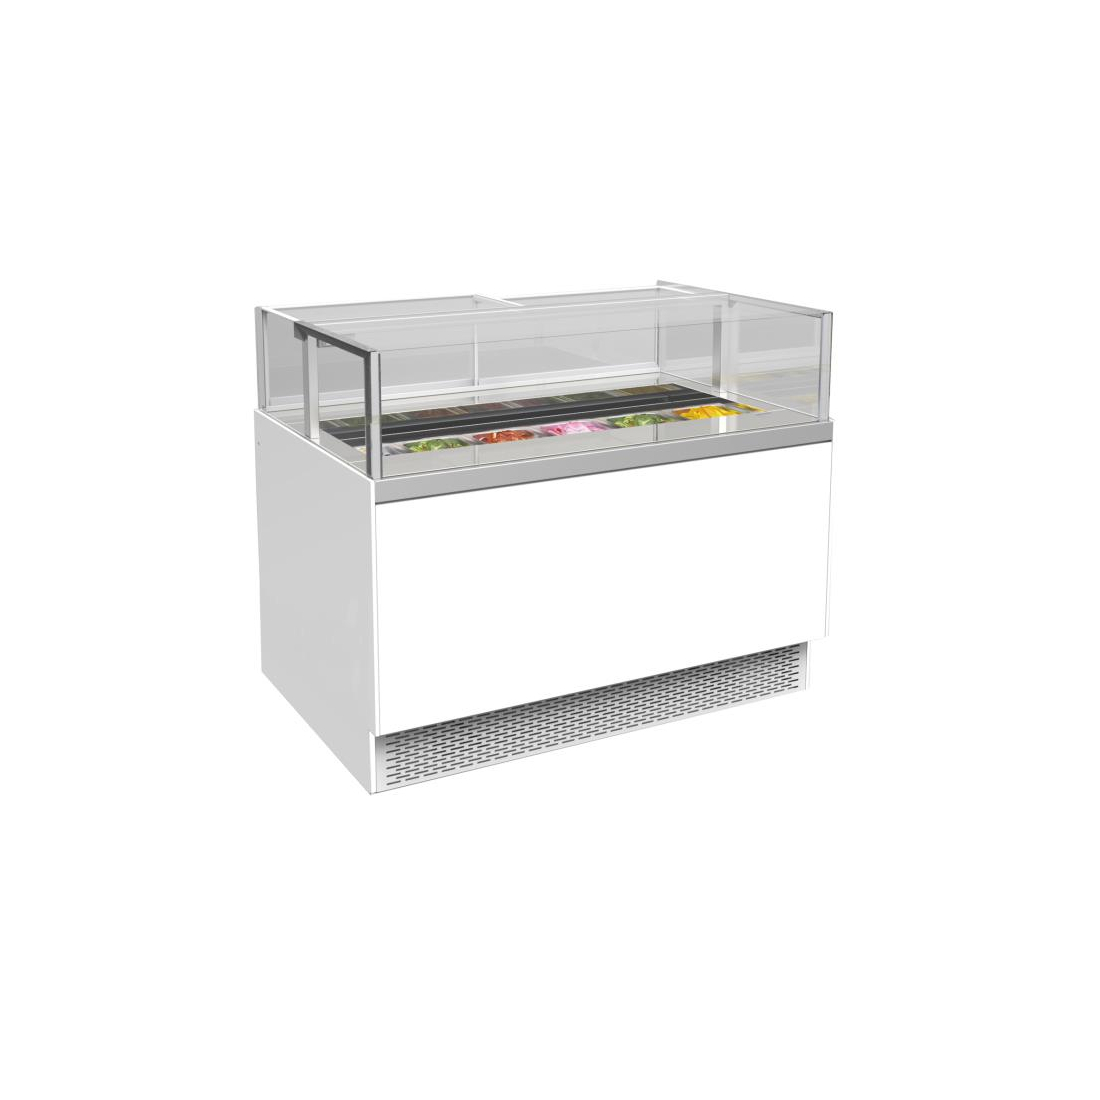 OMAJ PRO (DICS900) Display Show Cake and Chocolate Case Bottom With Drawer White 90 cm|mkayn|مكاين